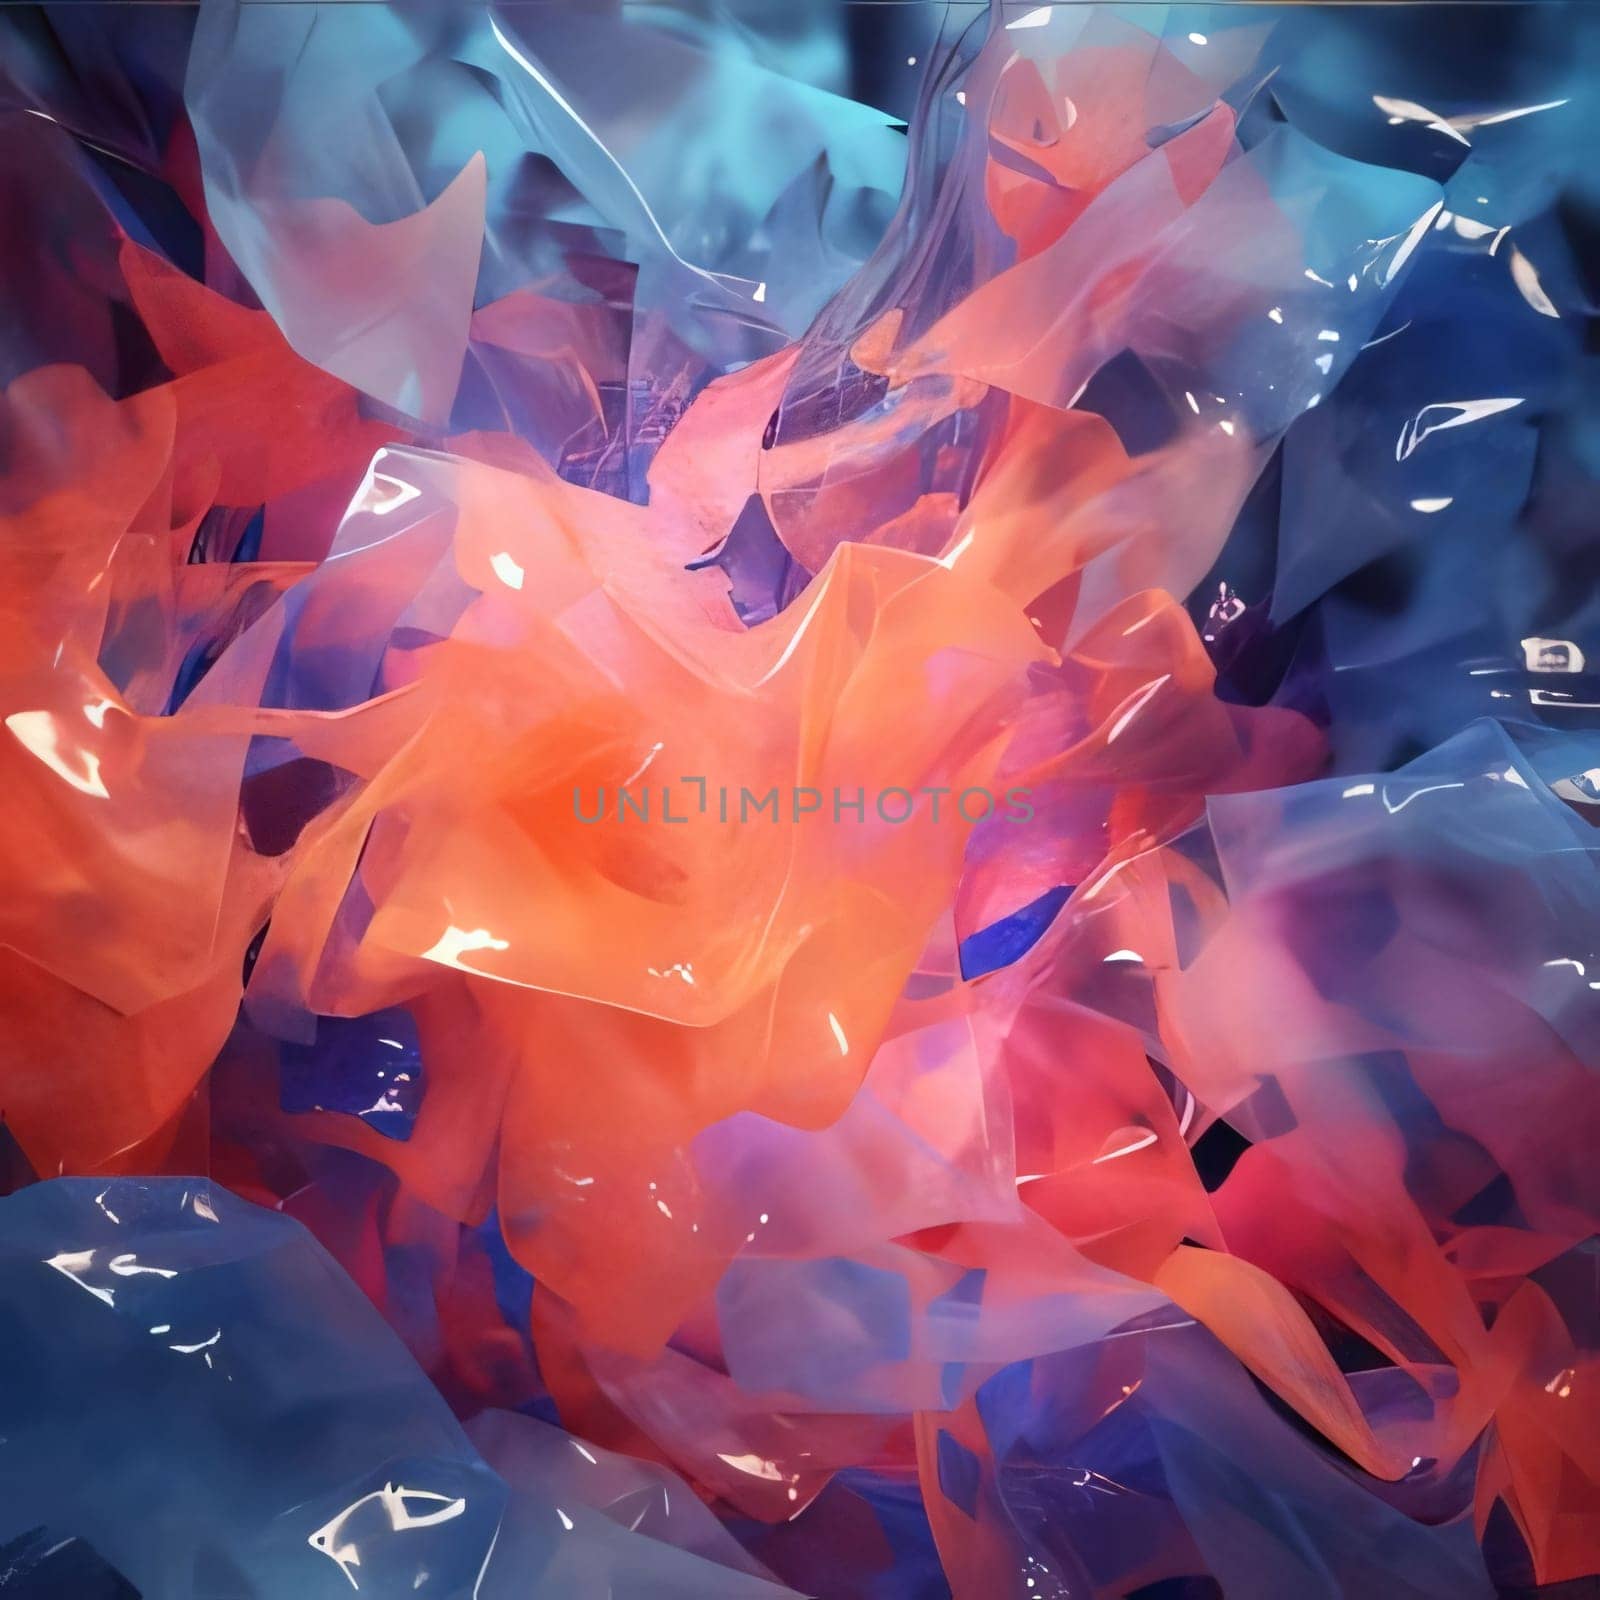 Abstract background design: abstract background made of blue and red transparent plastic cellophane